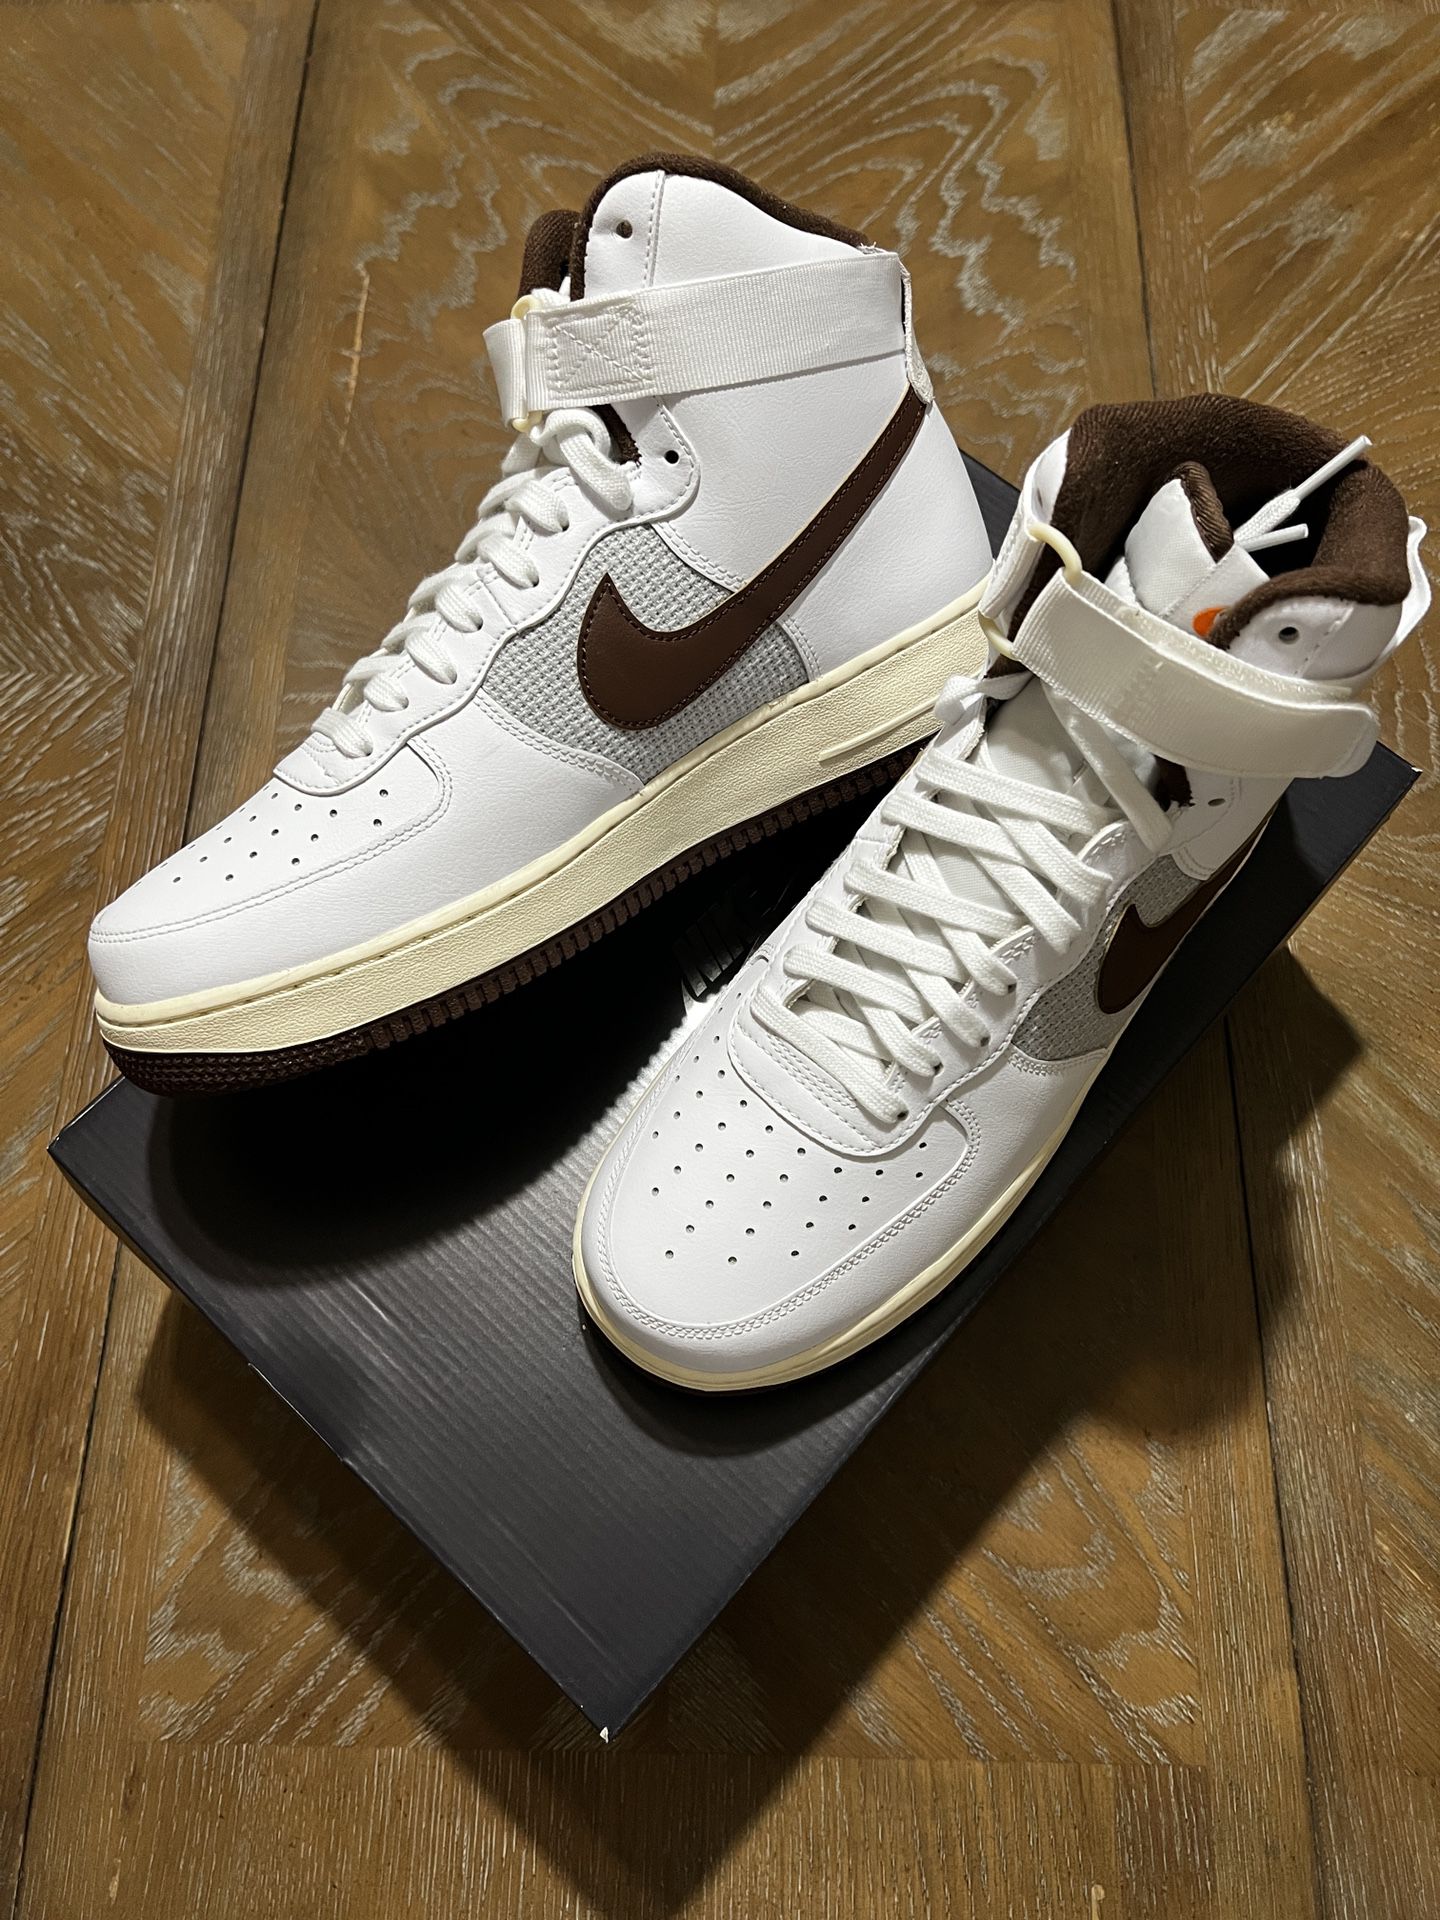 Air Force 1 High Lv8 Chocolate Size 11 for Sale in Gilbert, AZ - OfferUp